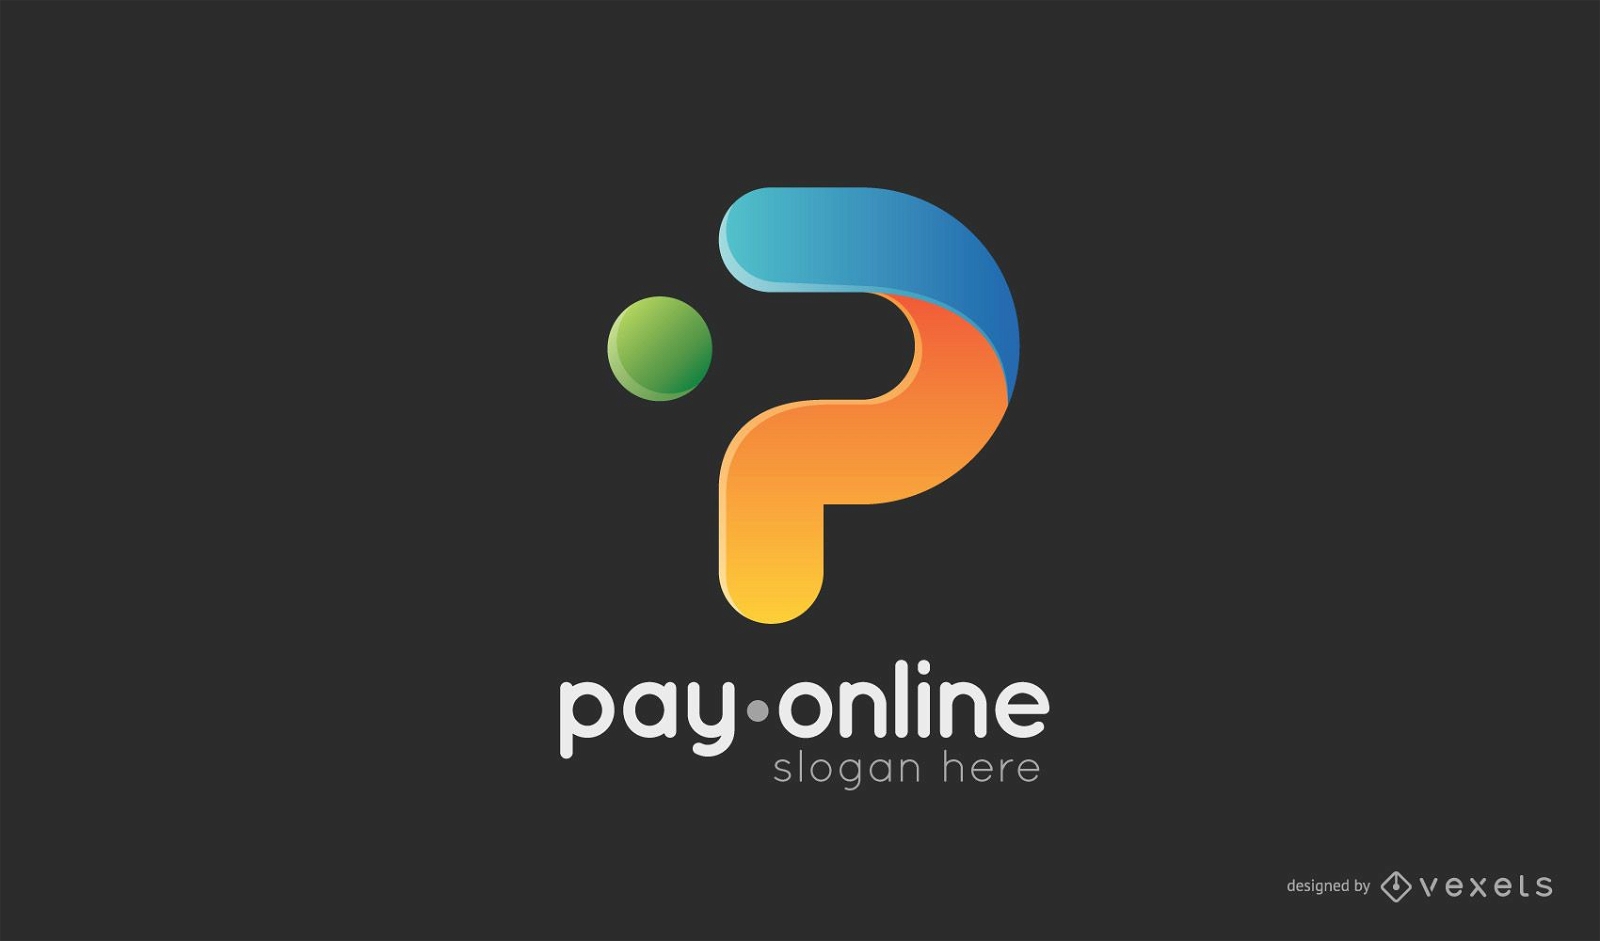 Play online logo template